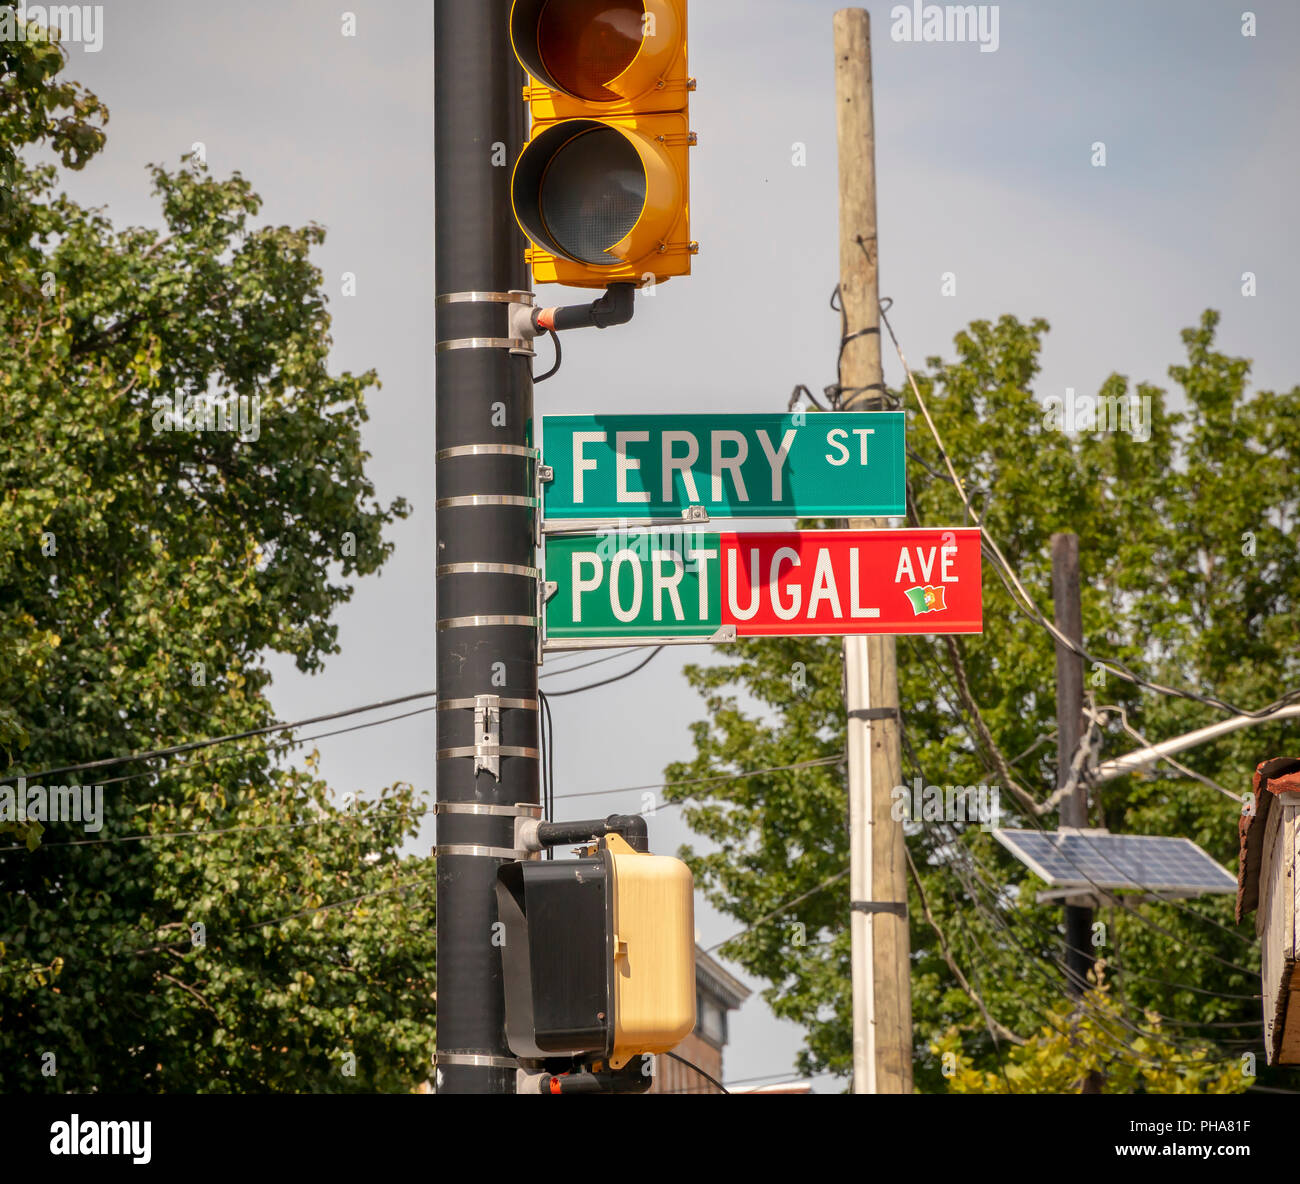 Commemorative street sign in the Ironbound neighborhood in Newark, NJ on Saturday, August 25, 2018. The neighborhood is a Portuguese enclave and a major tourist attraction for the city. (© Richard B. Levine) Stock Photo